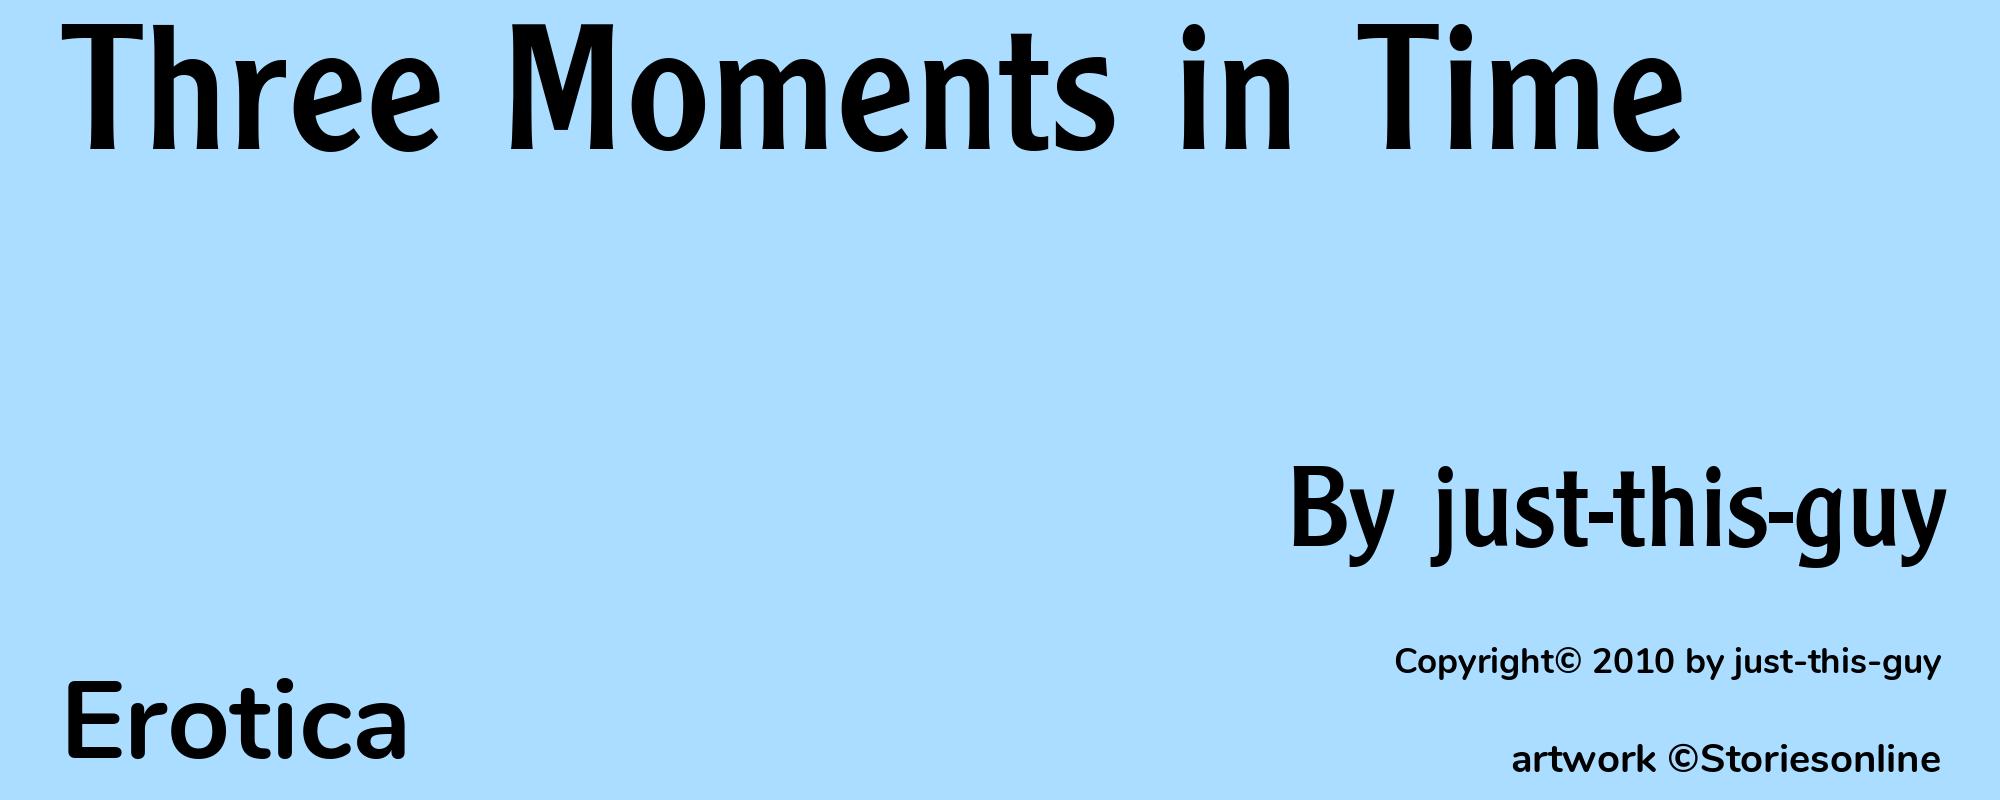 Three Moments in Time - Cover